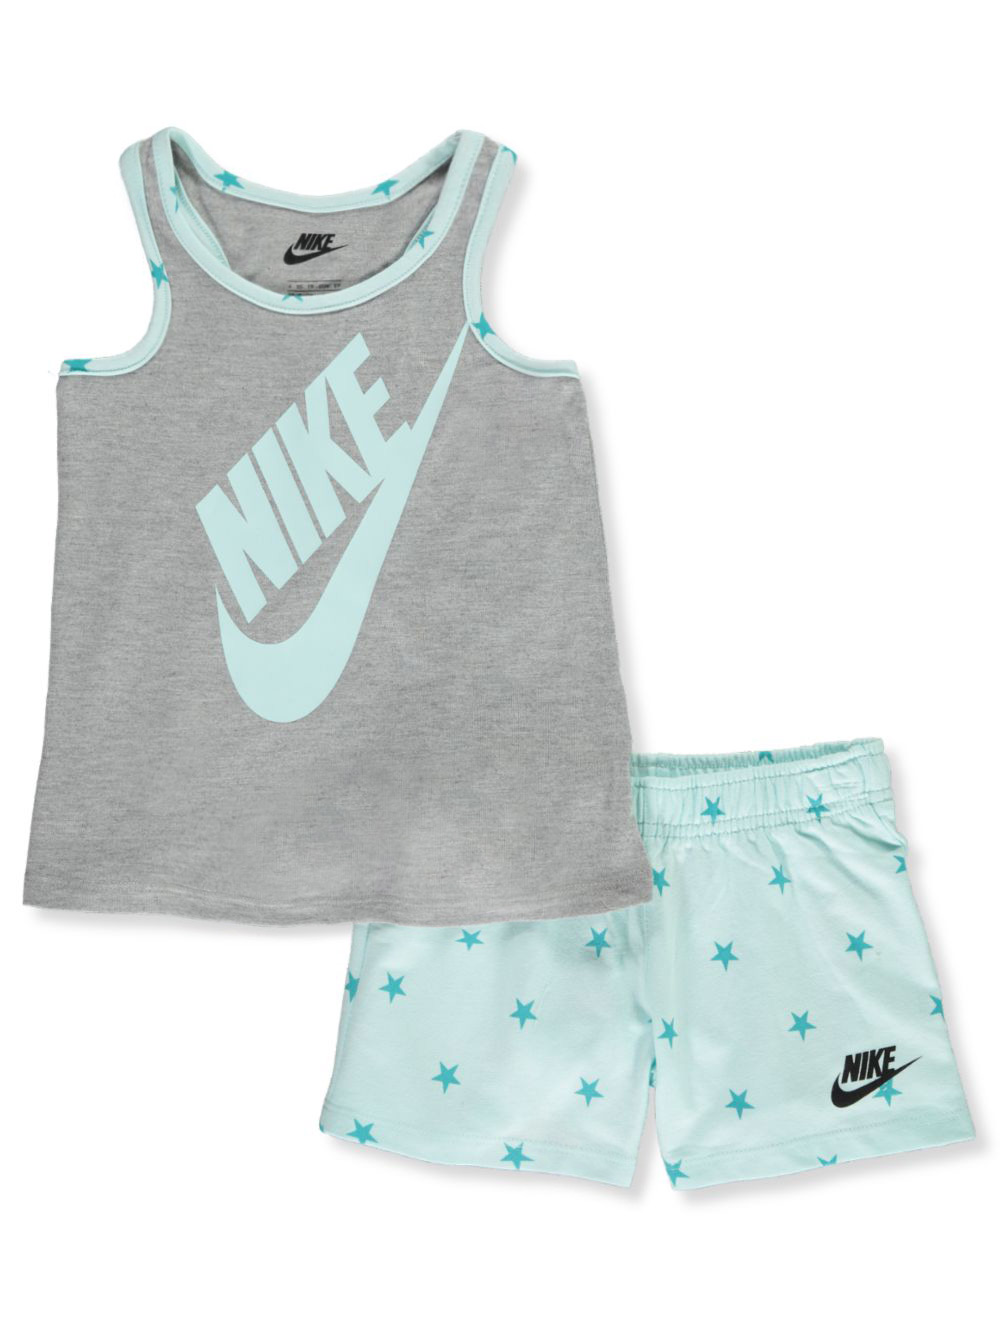 Nike Short Sets from Cookie's Kids